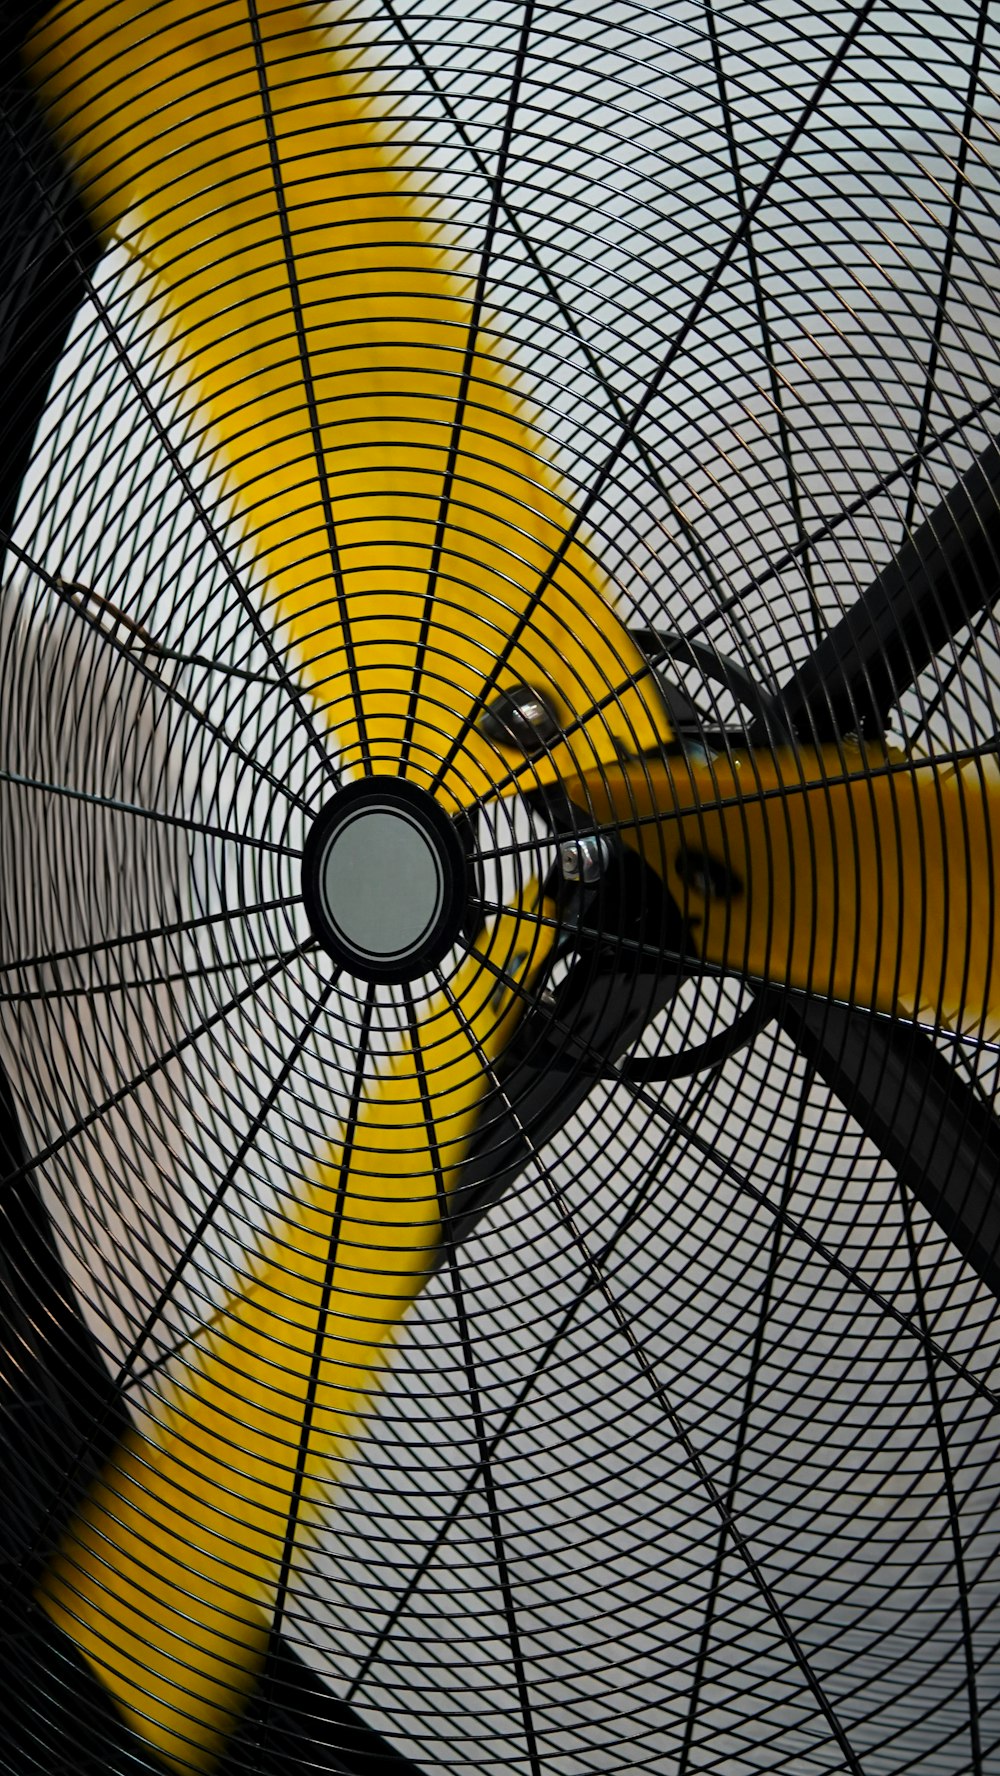 a close up of a yellow and black fan